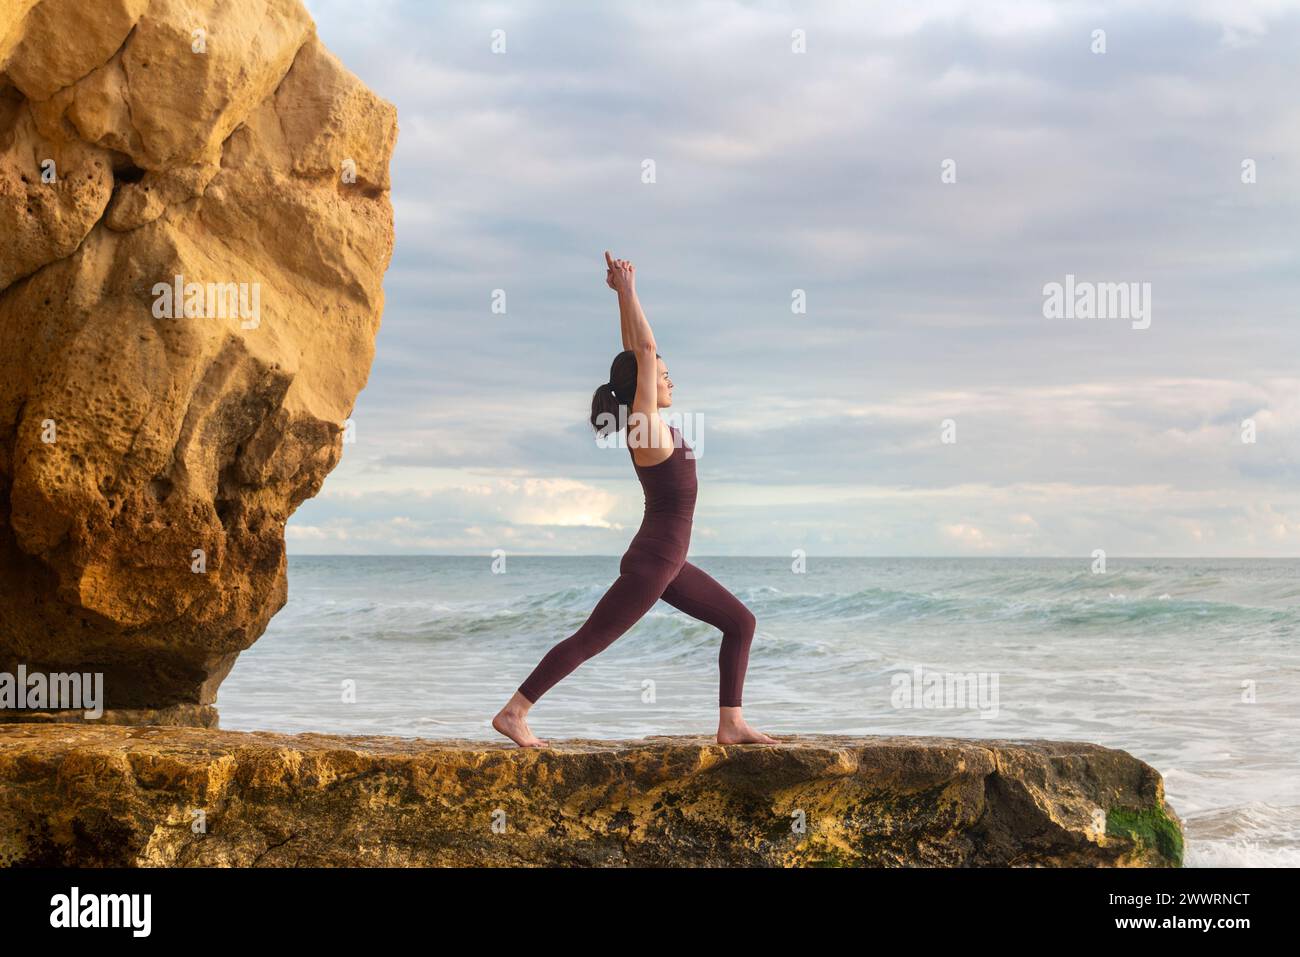 Woman practicing yoga standing on a rock by the ocean, arms above head stretching. Stock Photo